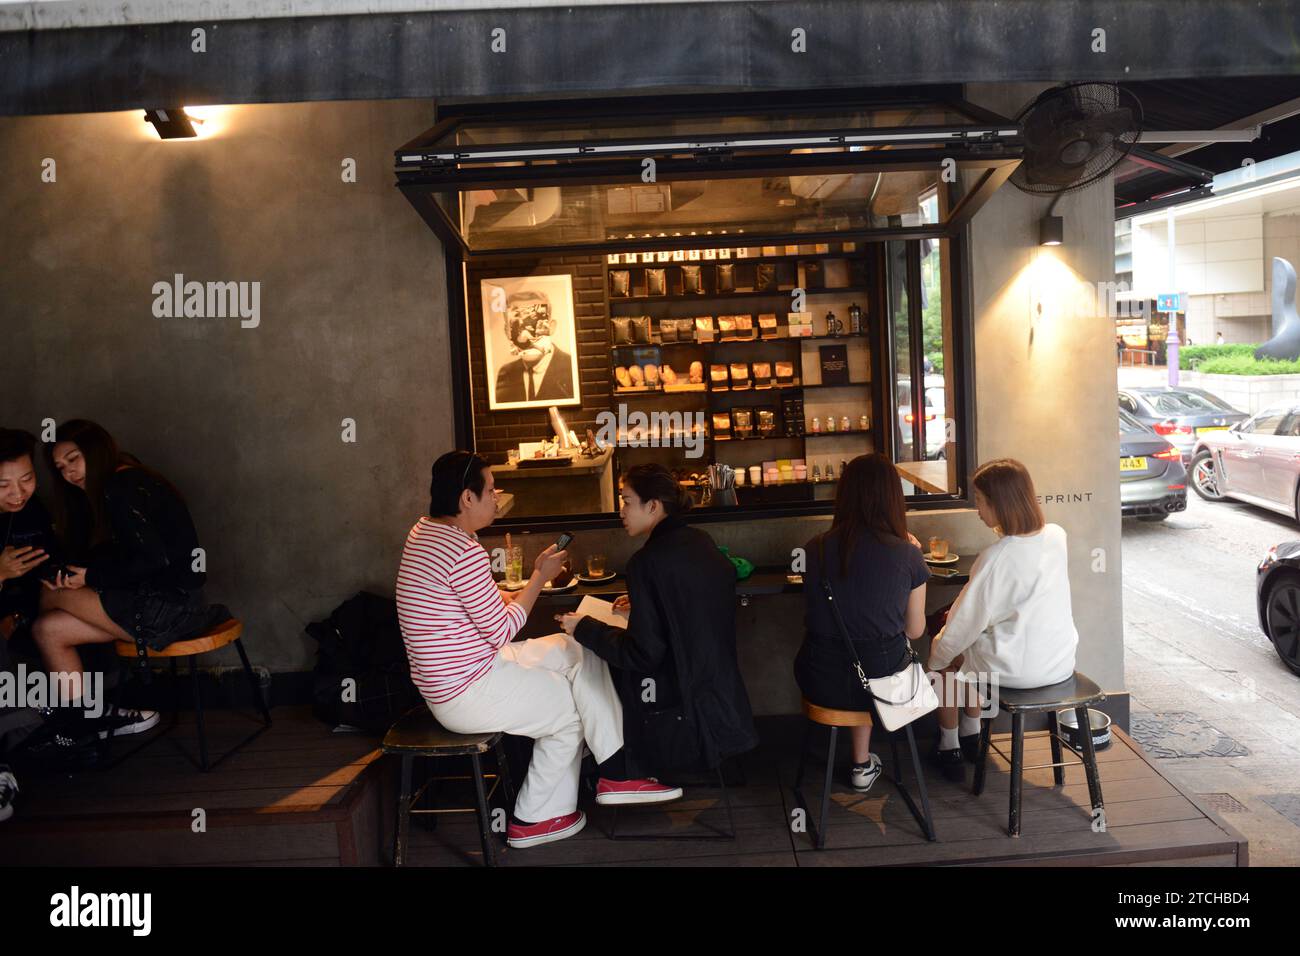 The Fineprint cafe on Second street in Sai Ying Pun, Hong Kong. Stock Photo